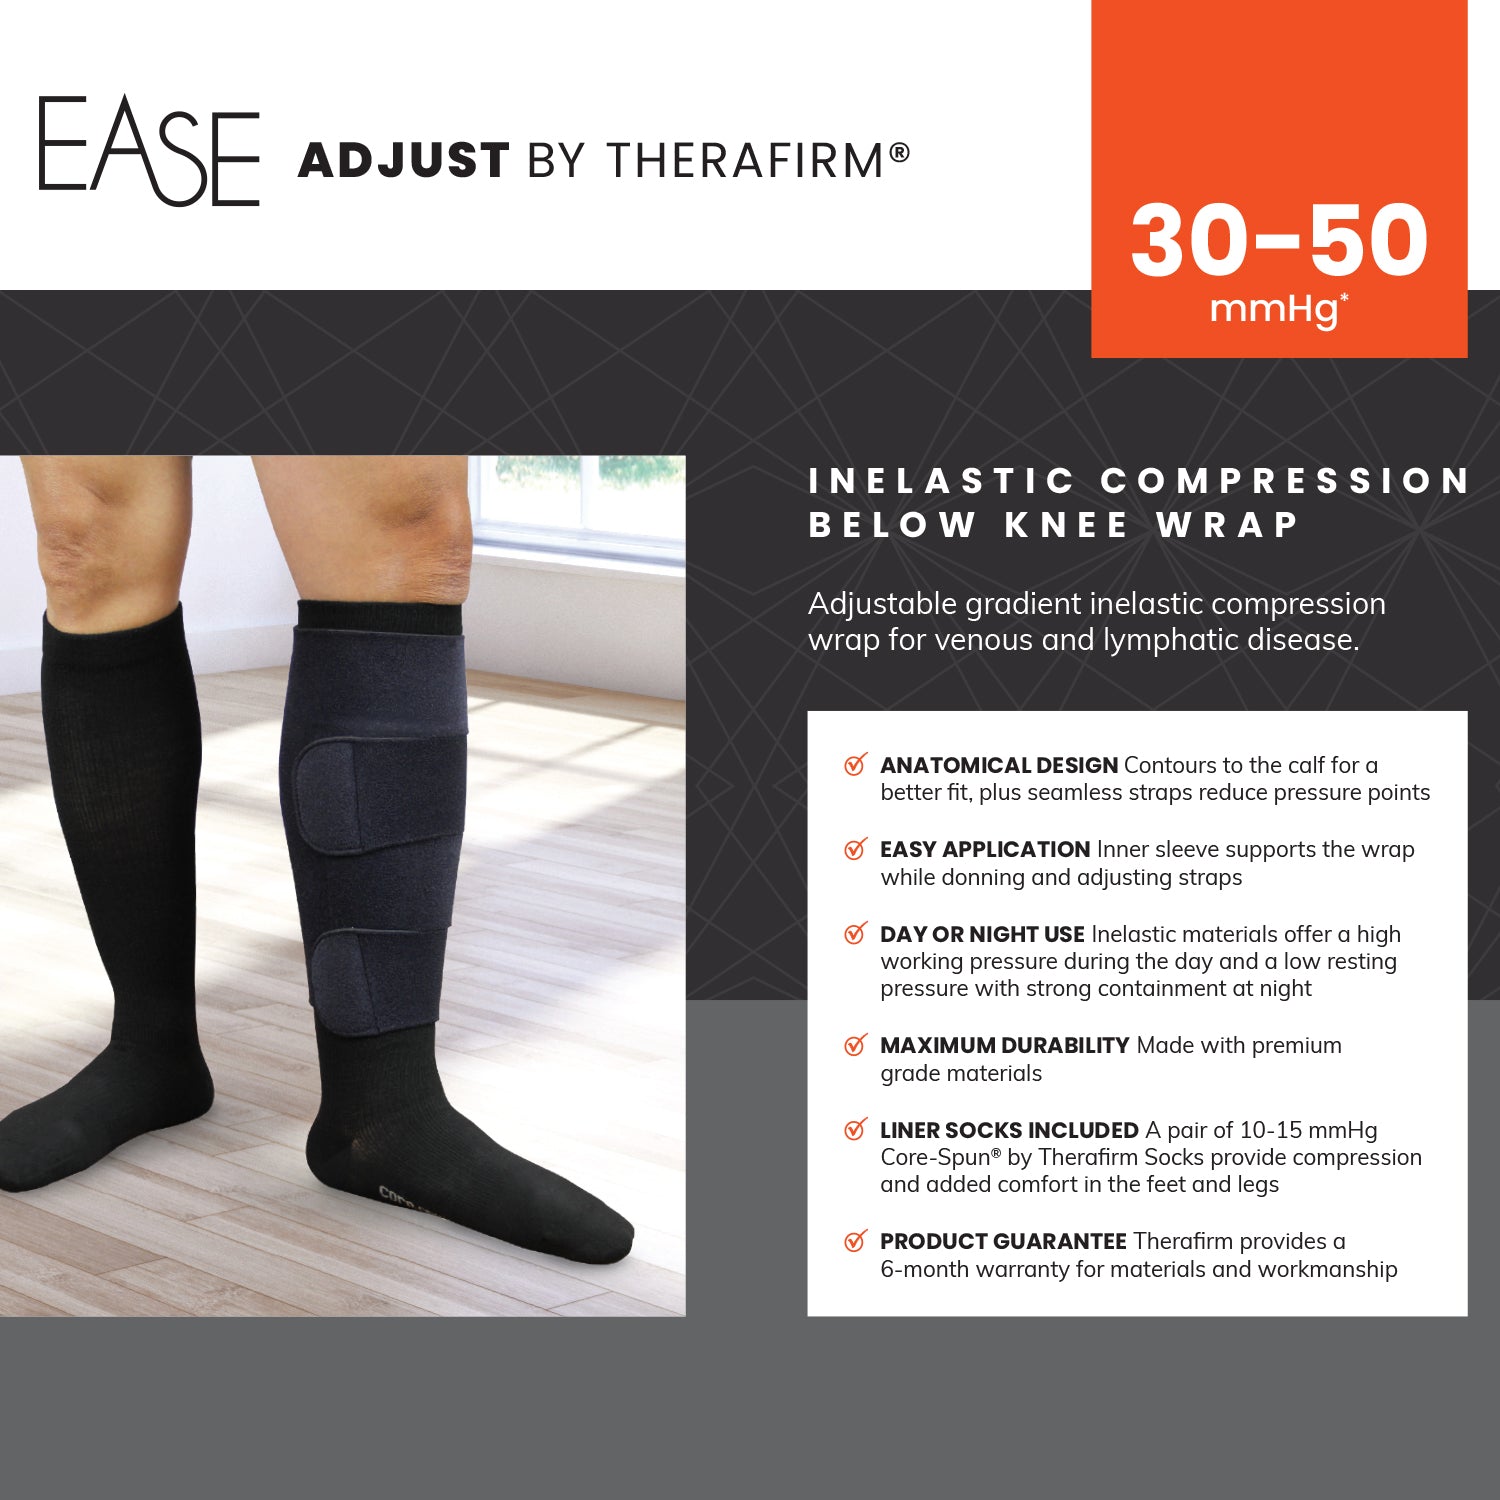 Ease Adjust by Therafirm™ Wrap